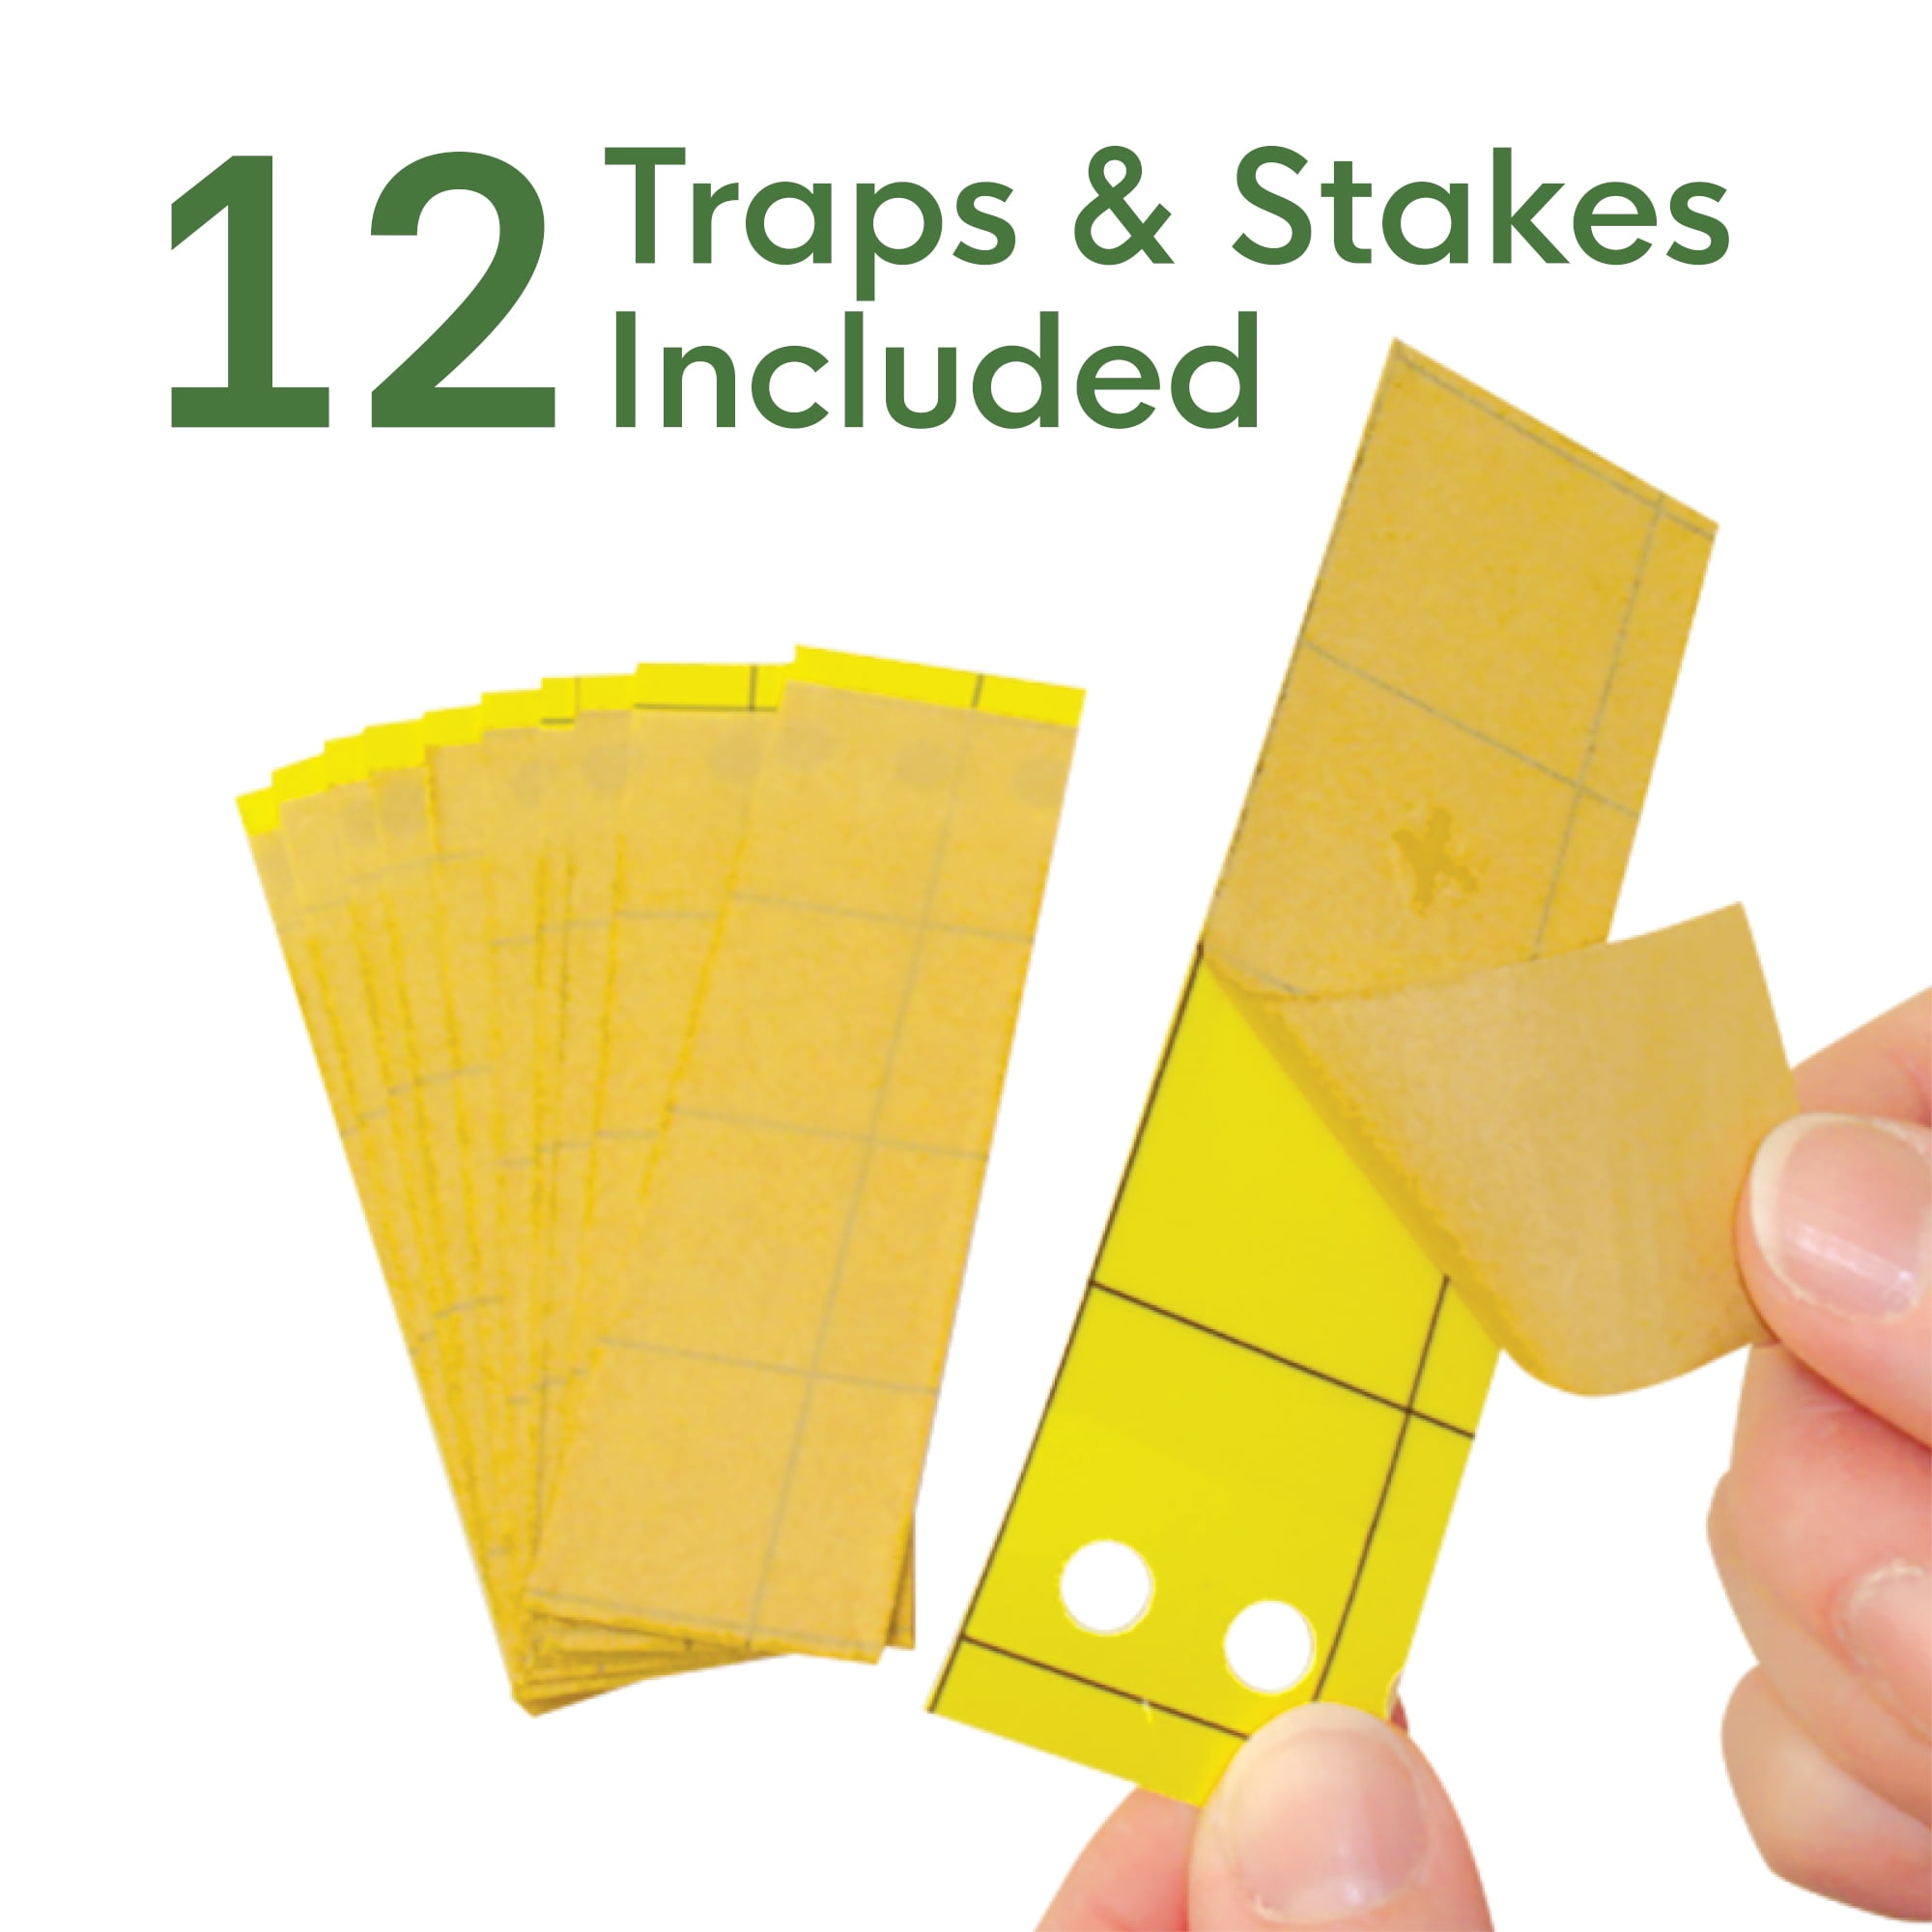 Enoz Gnat Styx (6 Pack) - Biocare Gnat Stix - Sticky Paper Trap - Pesticide Free - Lasts Up to 3 Months - Includes 72 Traps and Stakes | EB7300.6